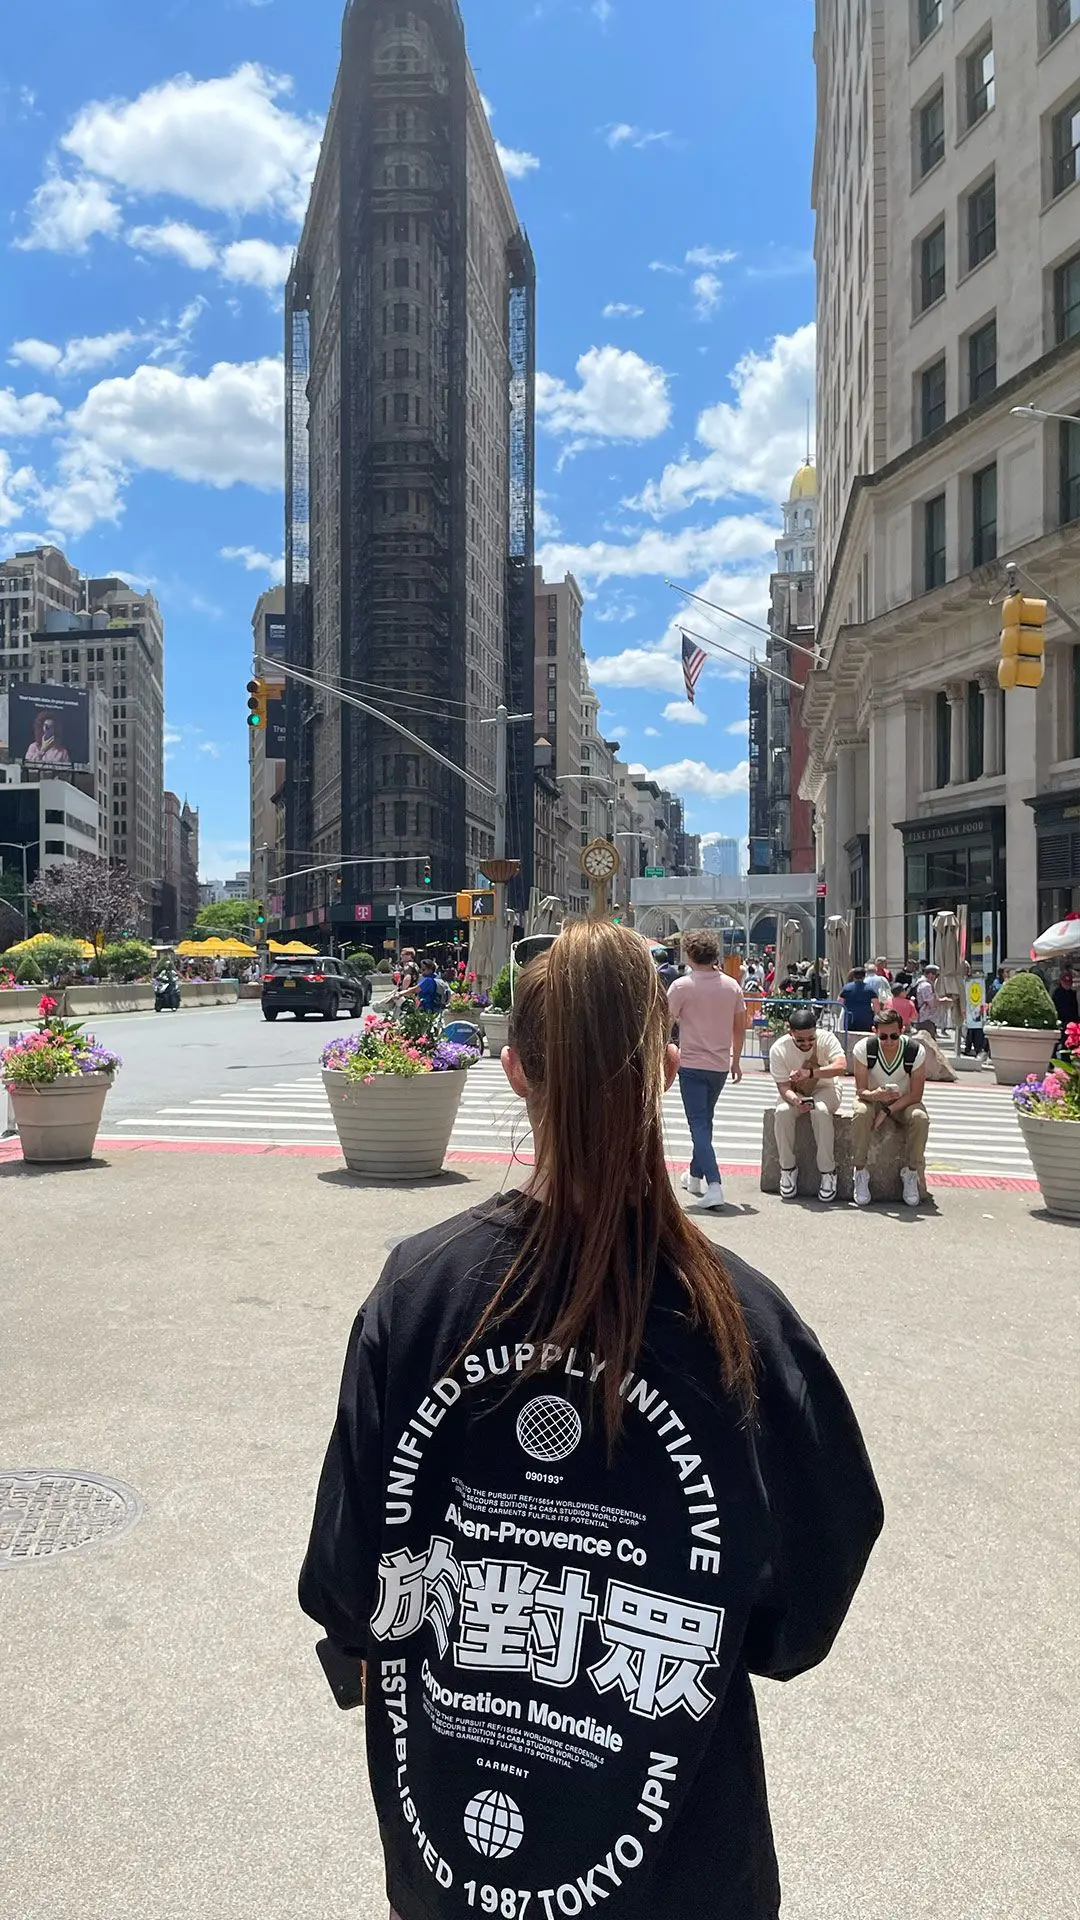 Girl facing away from camera in black jumper with white designs with New York Flat Iron building in the background.